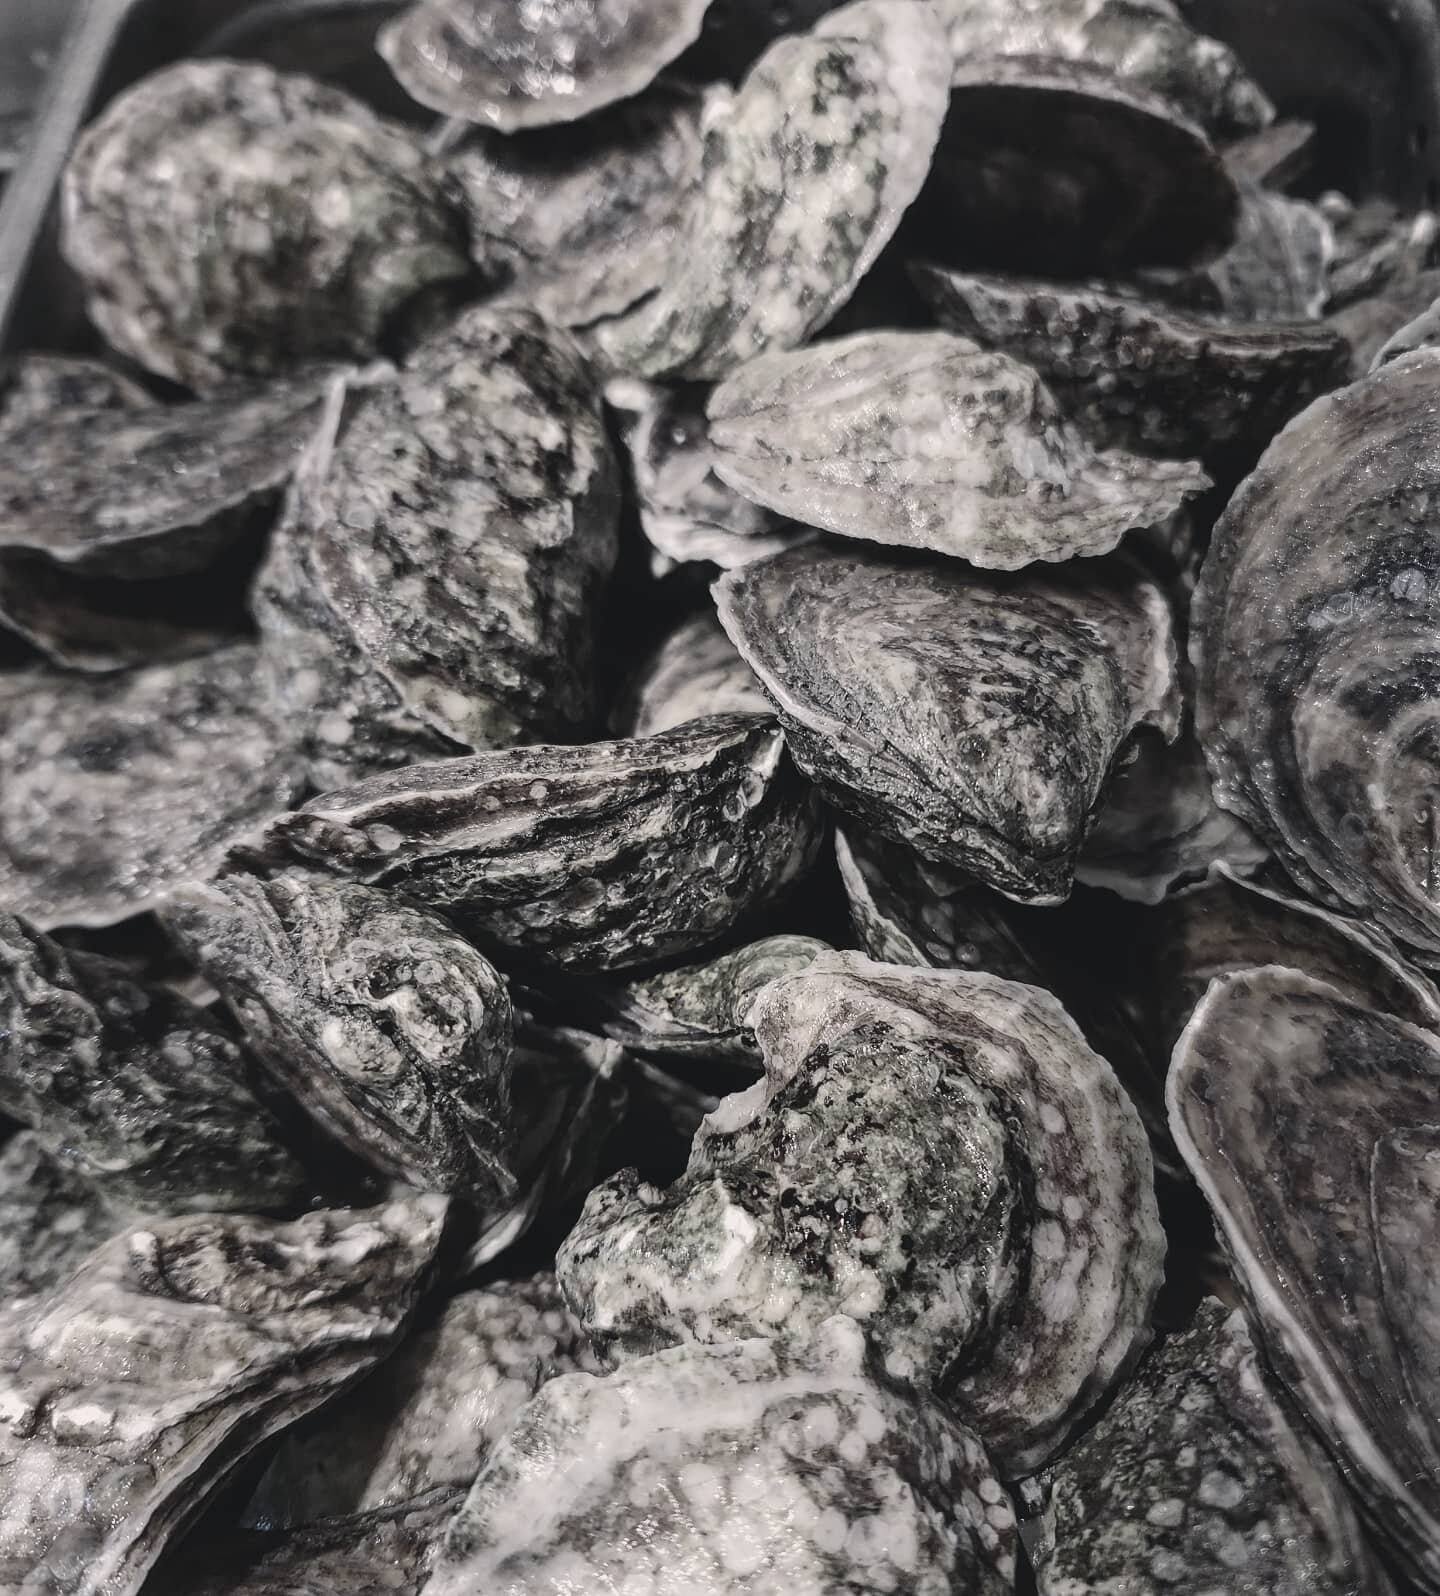 We're rocking oysters five days a week. This batch is John's River via @harborfishmarket Cheers!
.
.
.
.
.
.
.
.
.

#eatlocal #farmtotable #eatmaine #travelmaine #maine #mainedining #watervillemaine #fairfieldmaine #foodie #foodpics #seatotable #oyst